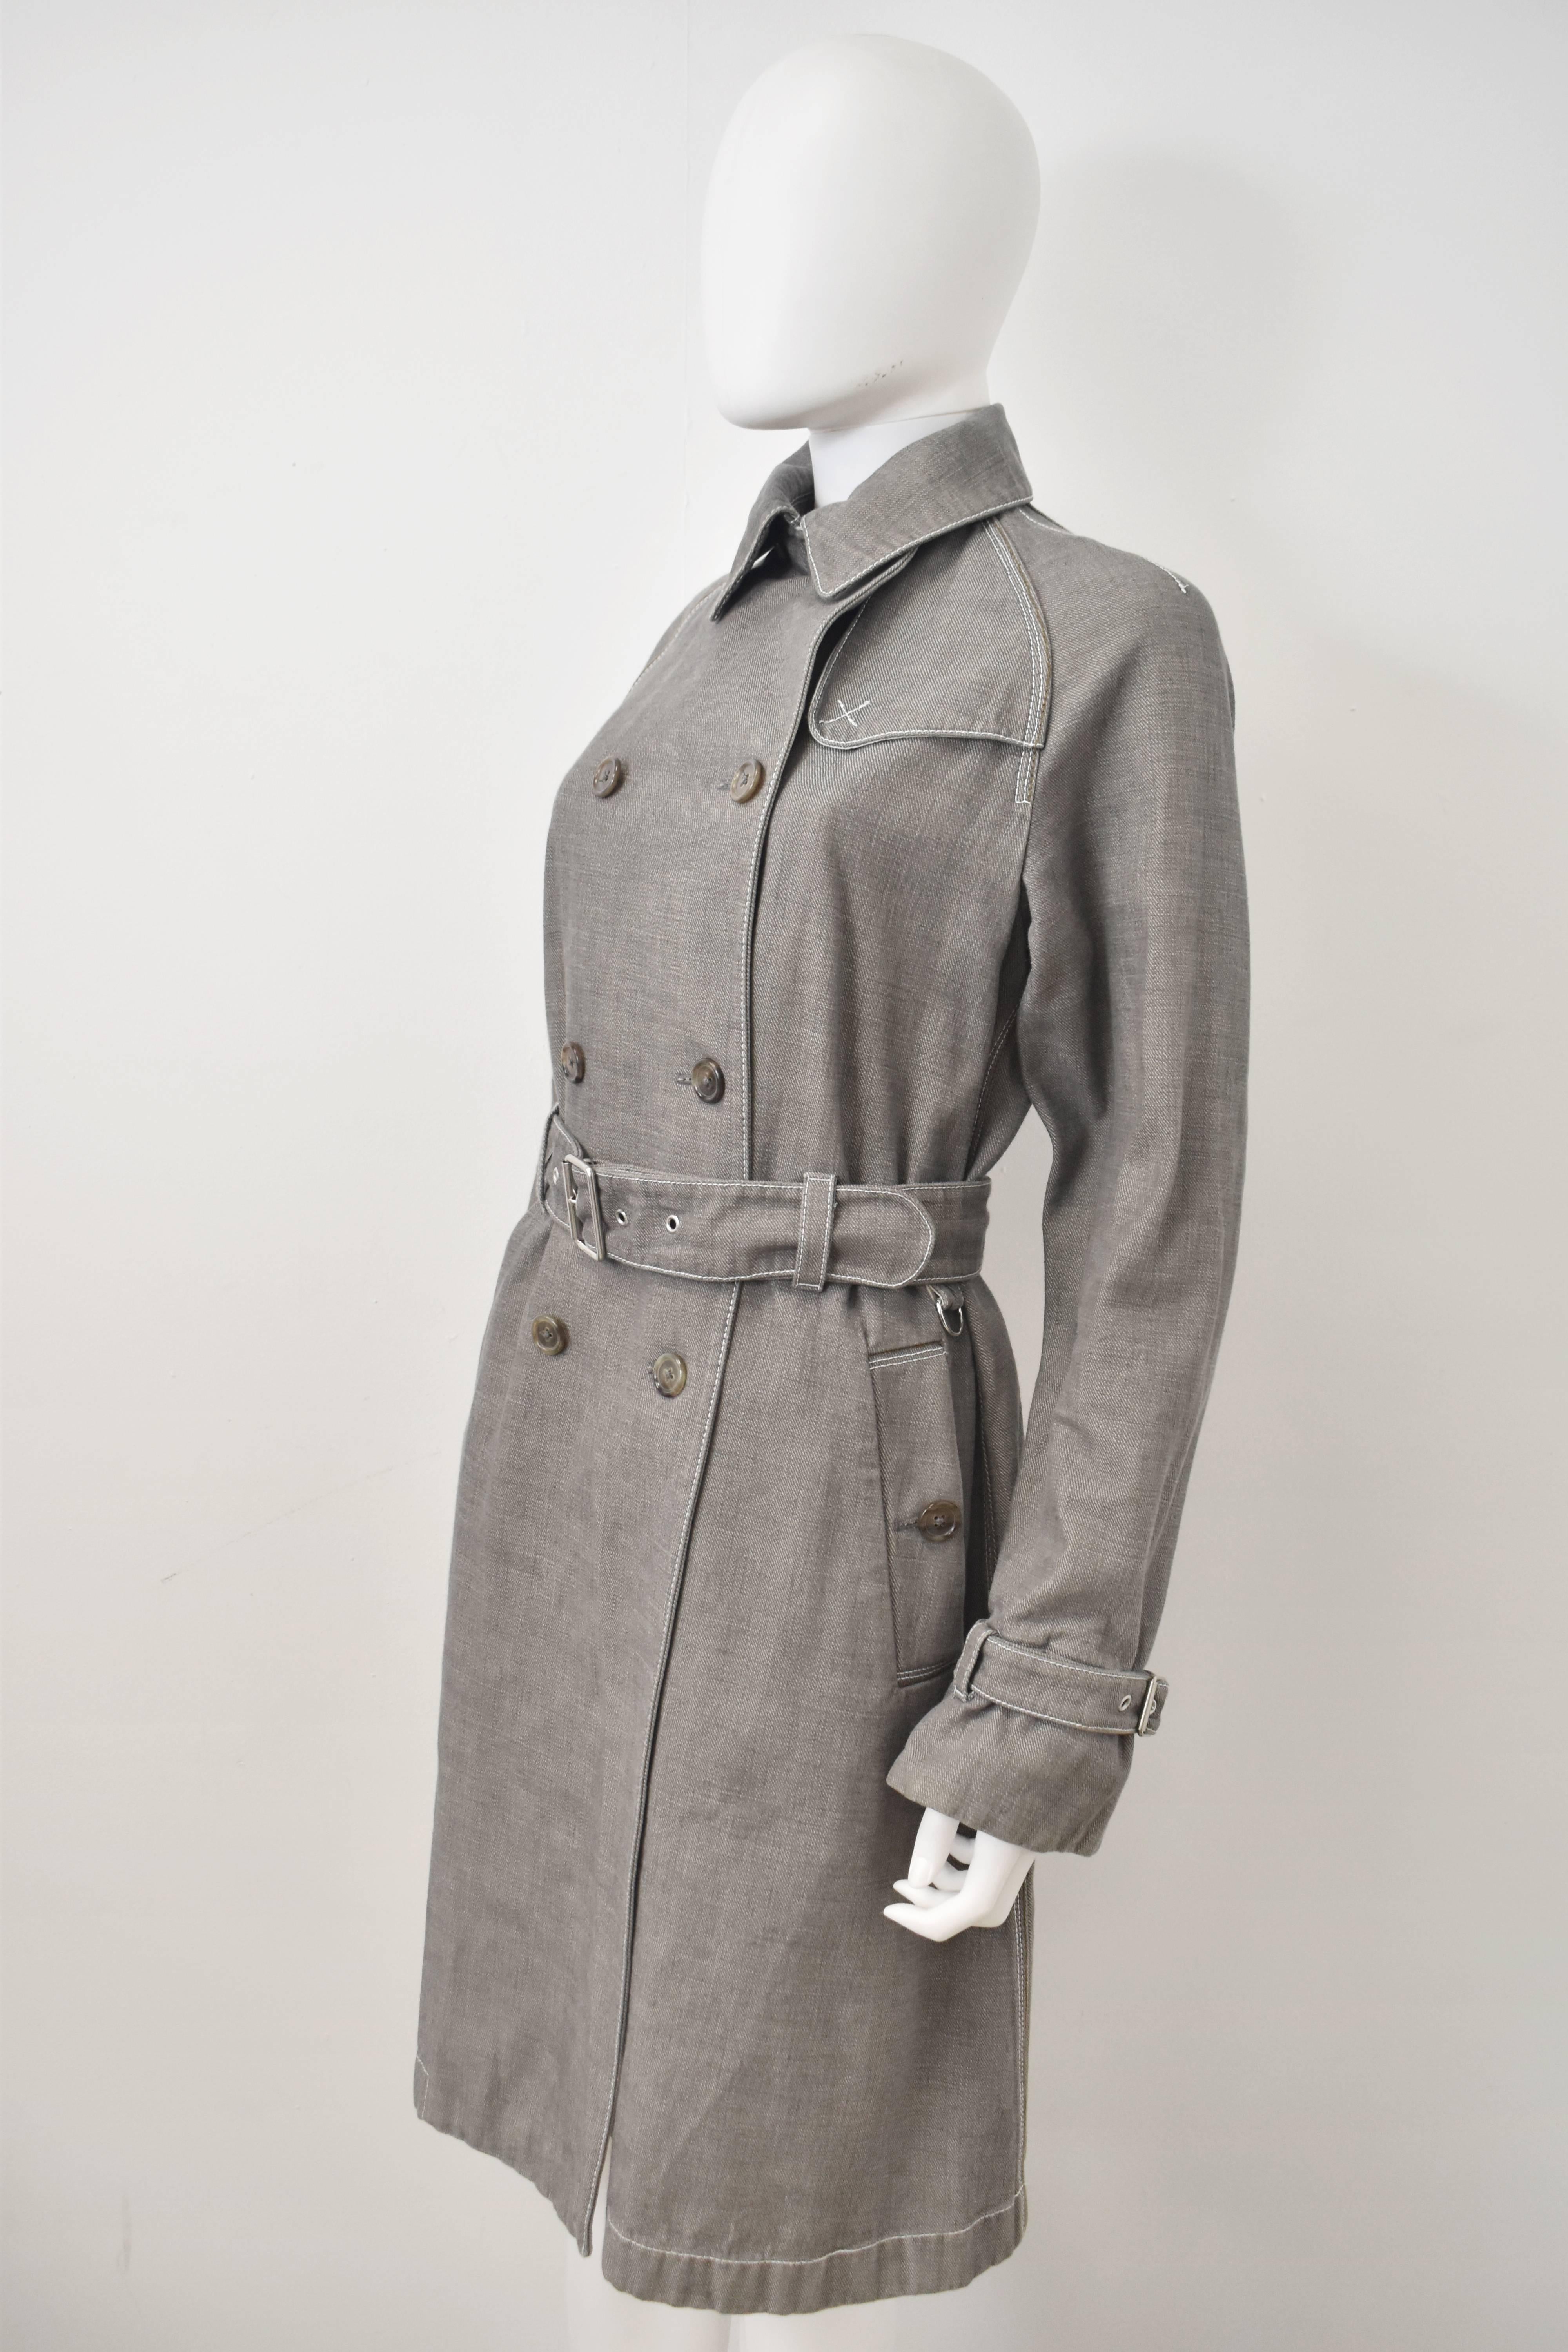 Jil Sander’s twist on the classic trench sees the coat made of grey cotton denim with brown and white contrast stitching along the seams. The coat has a classic trench shape with large collar, double breasted button fastening, waist belt and panel